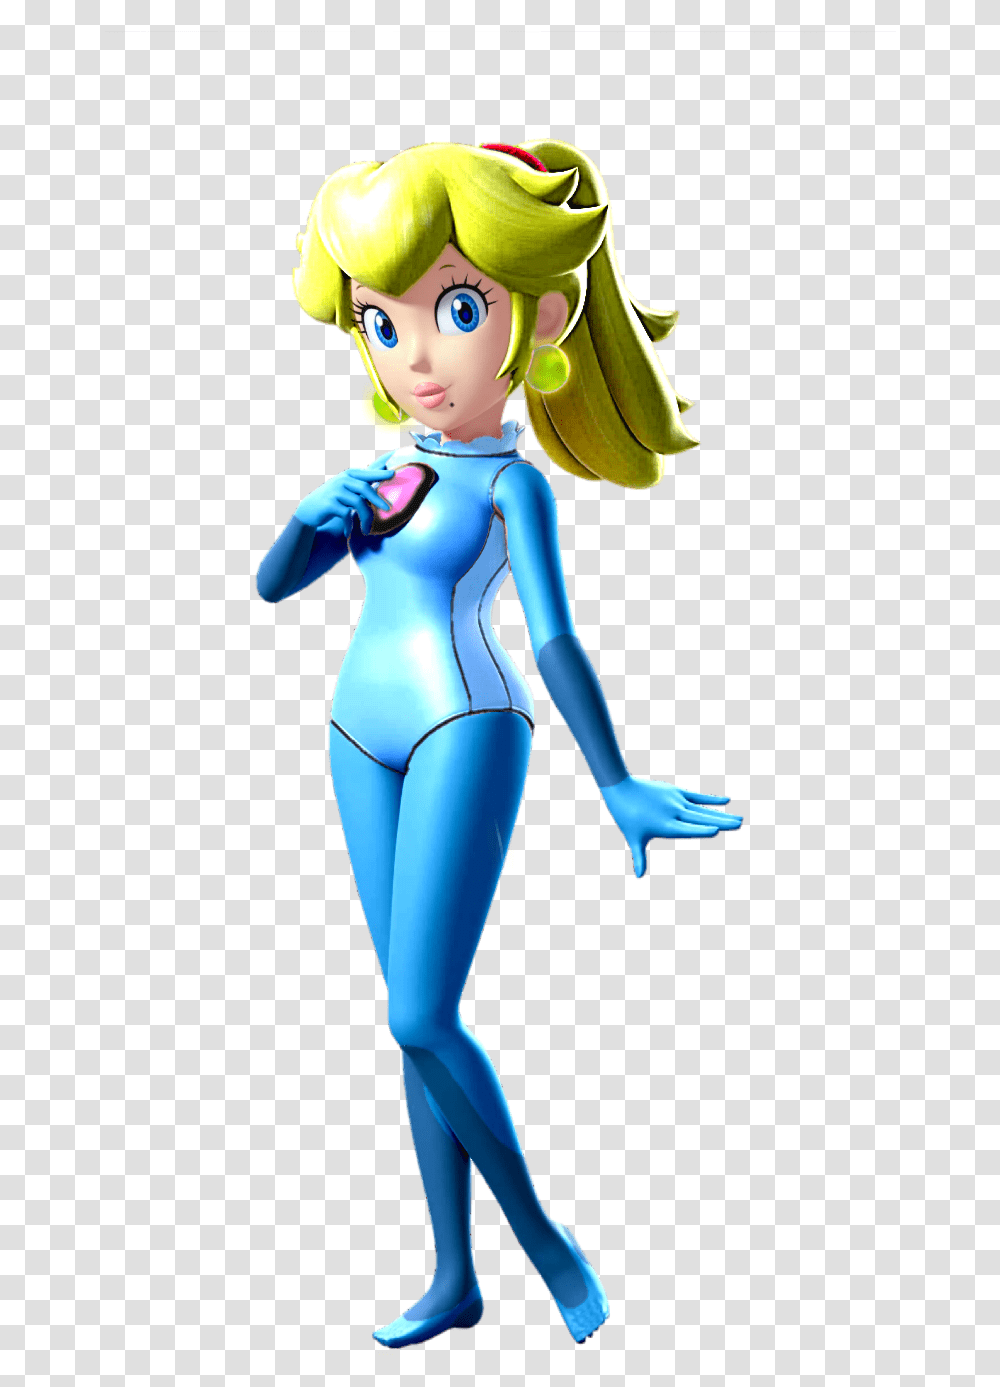 Mario Amp Sonic At The Olympic Games Super Princess Peach Mario Odyssey Peach Mario, Person, Female Transparent Png